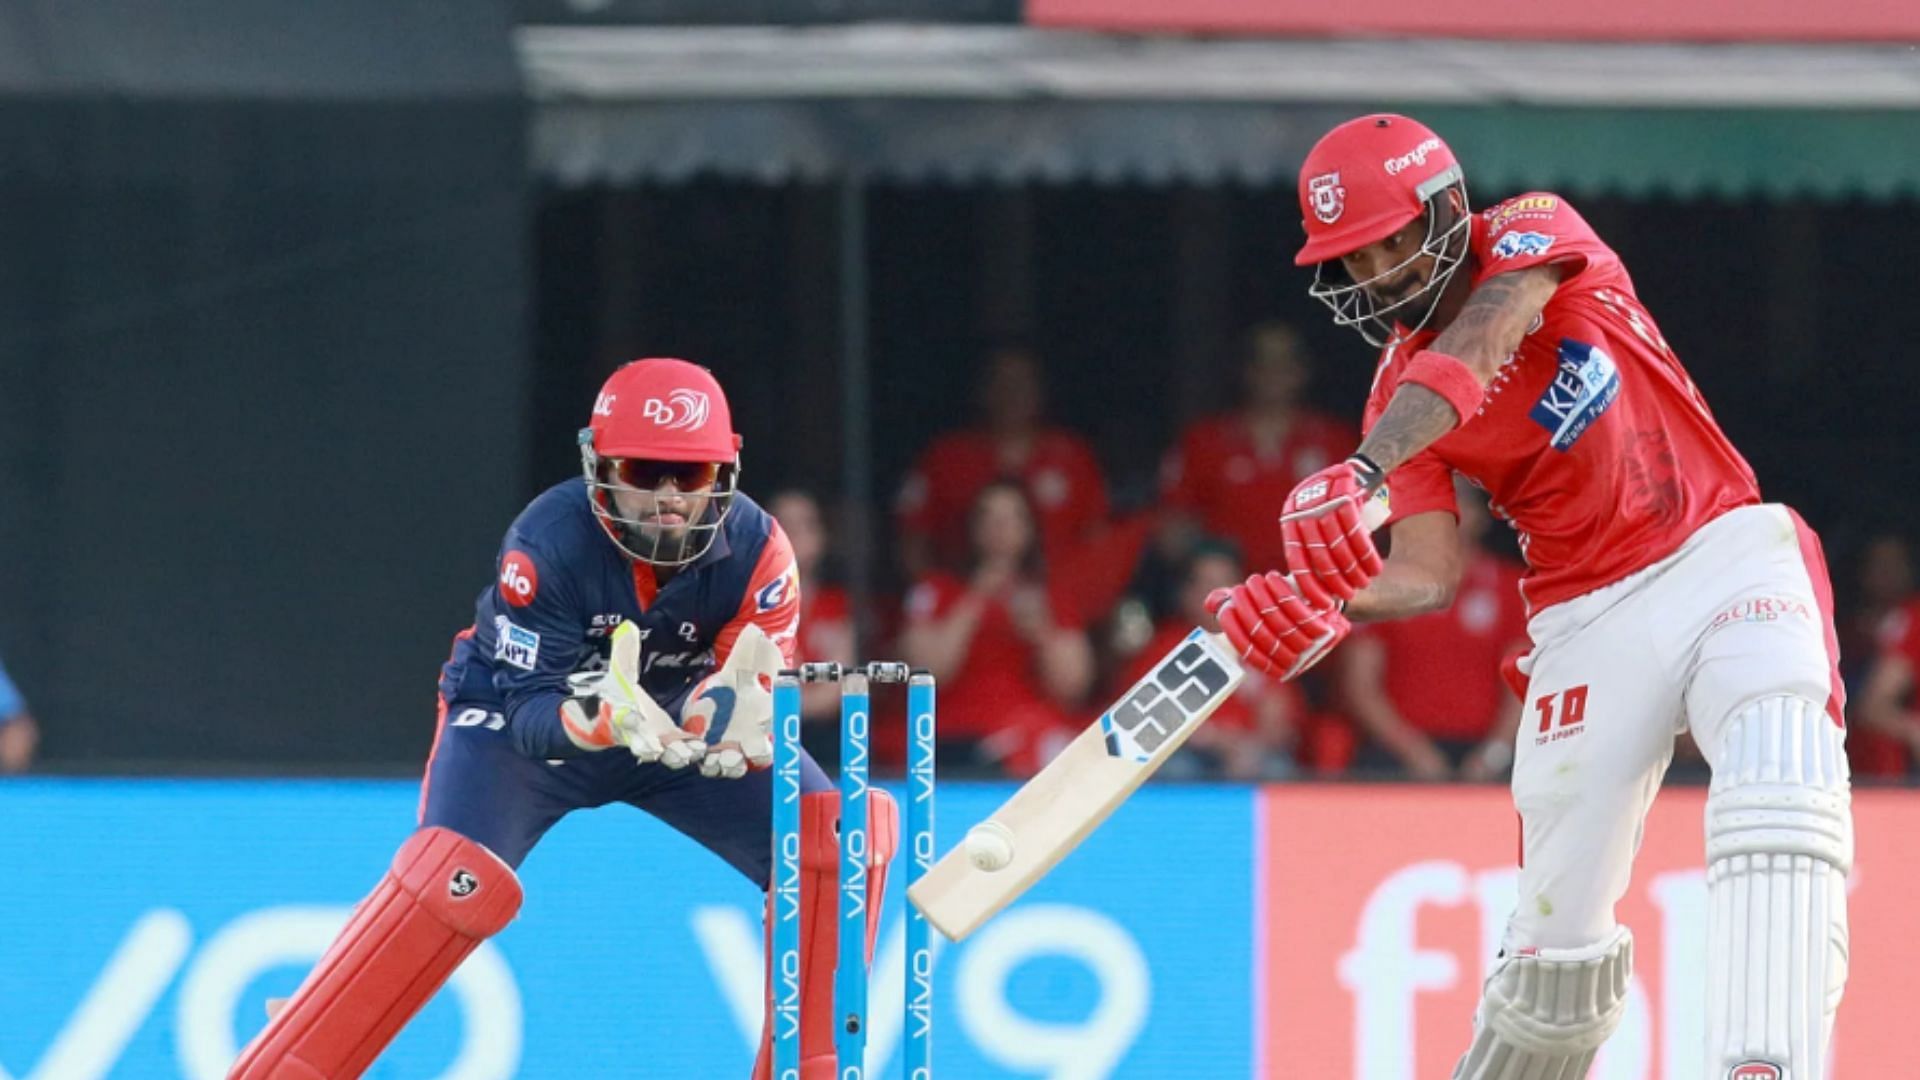 Rahul en route to a 14 ball fifty against the Delhi Daredevils.